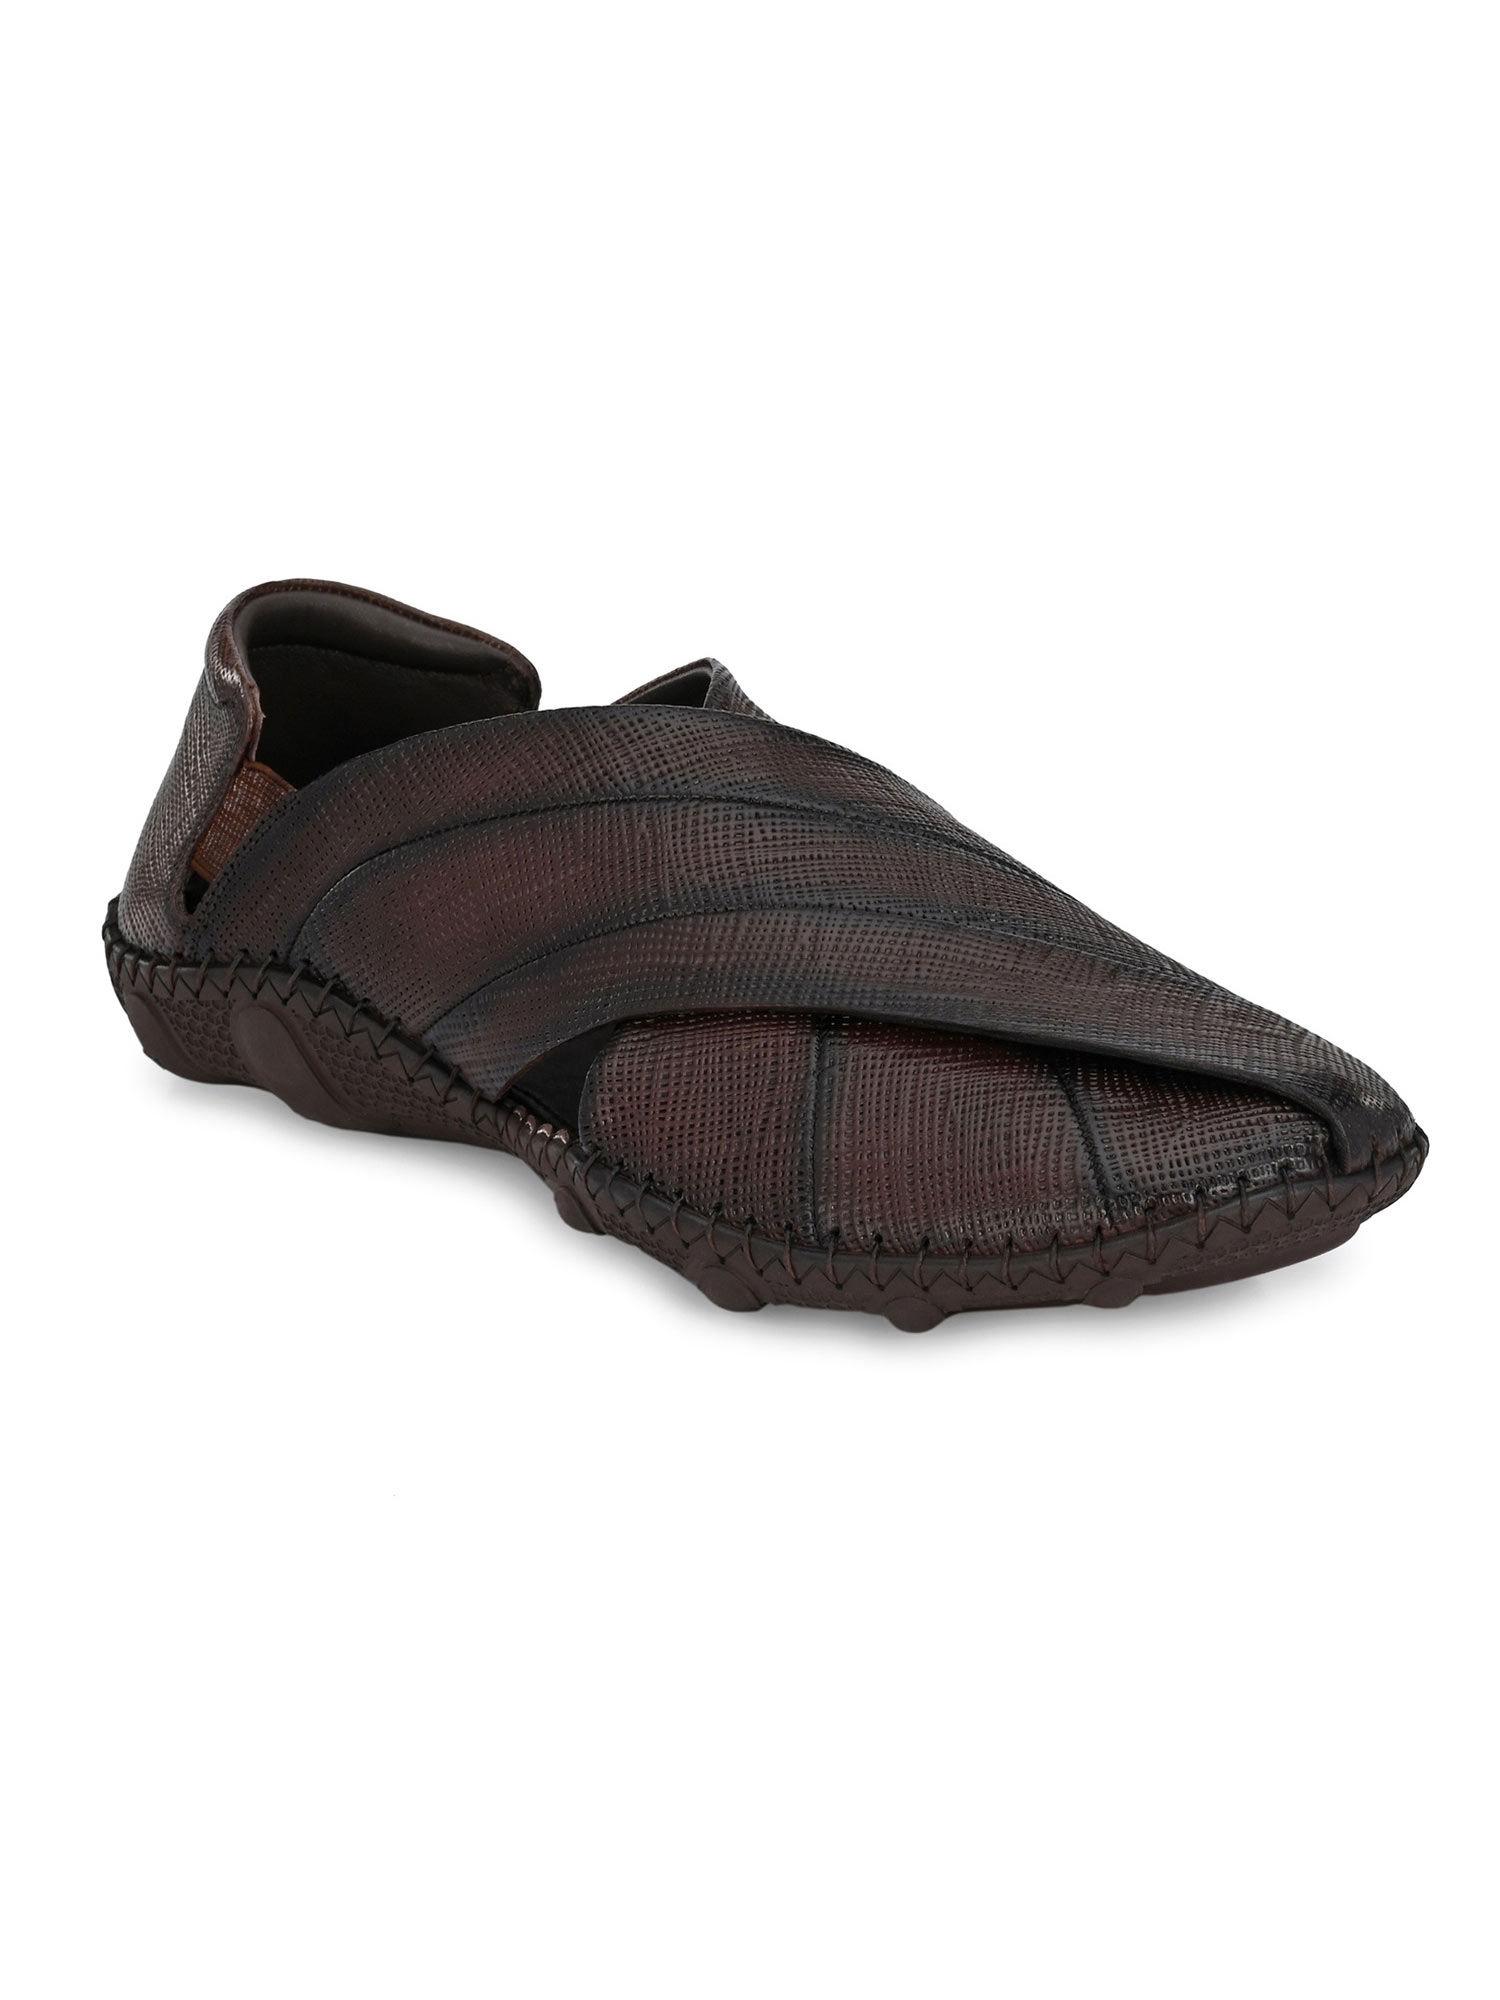 Men's Brown Leather Slip-On Shoe Style Sandals